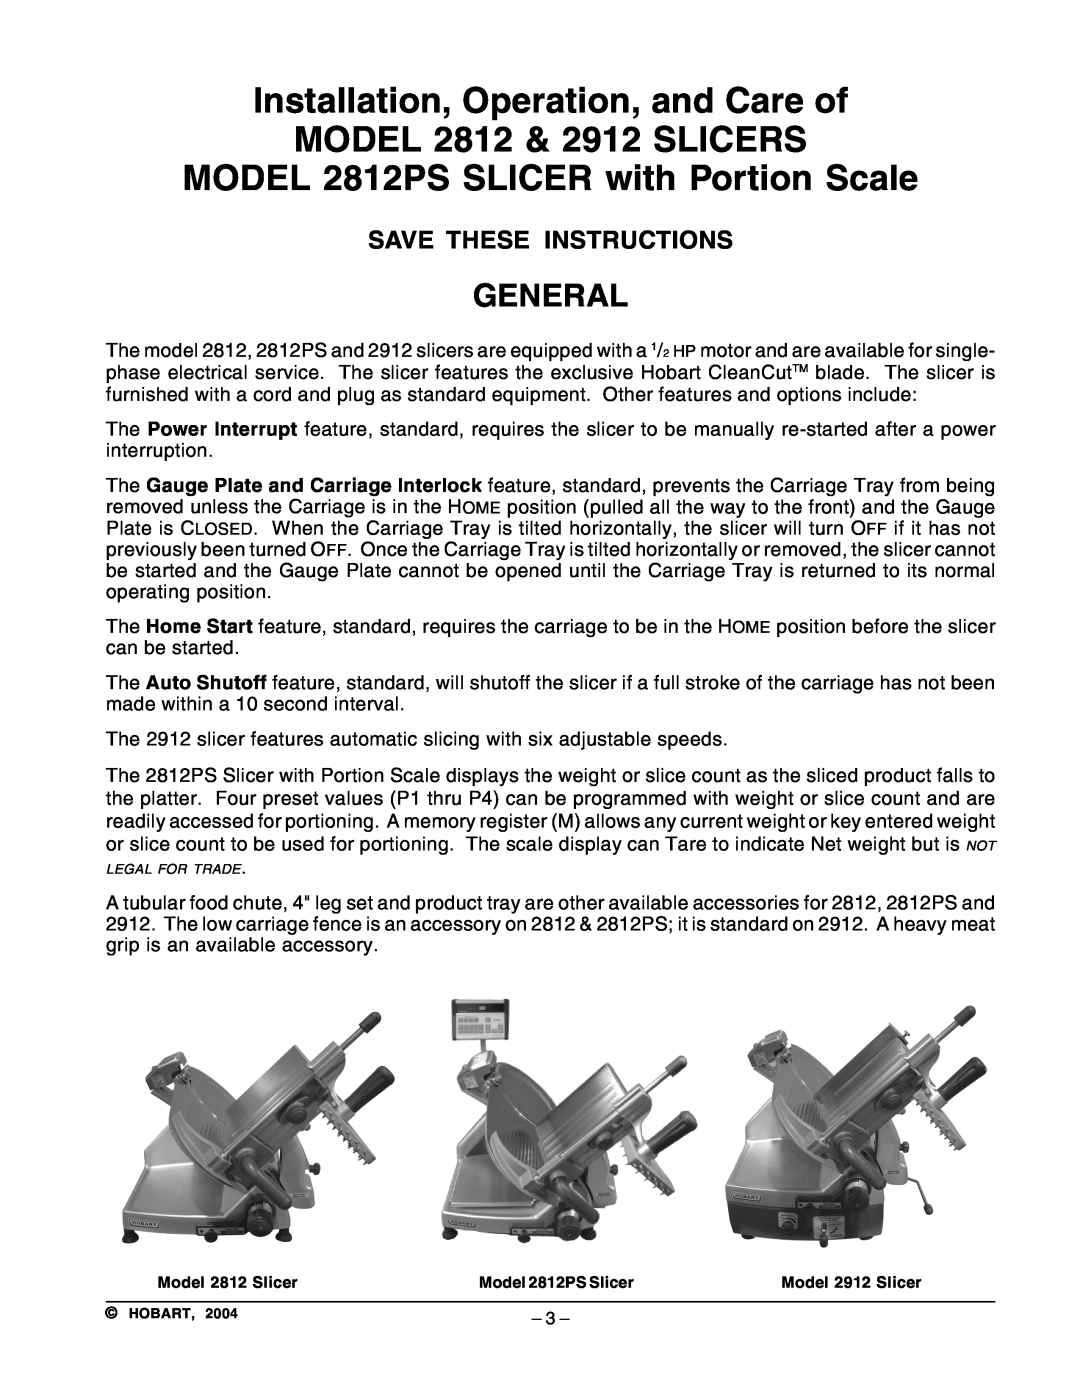 Hobart General, Installation, Operation, and Care of MODEL 2812 & 2912 SLICERS, MODEL 2812PS SLICER with Portion Scale 